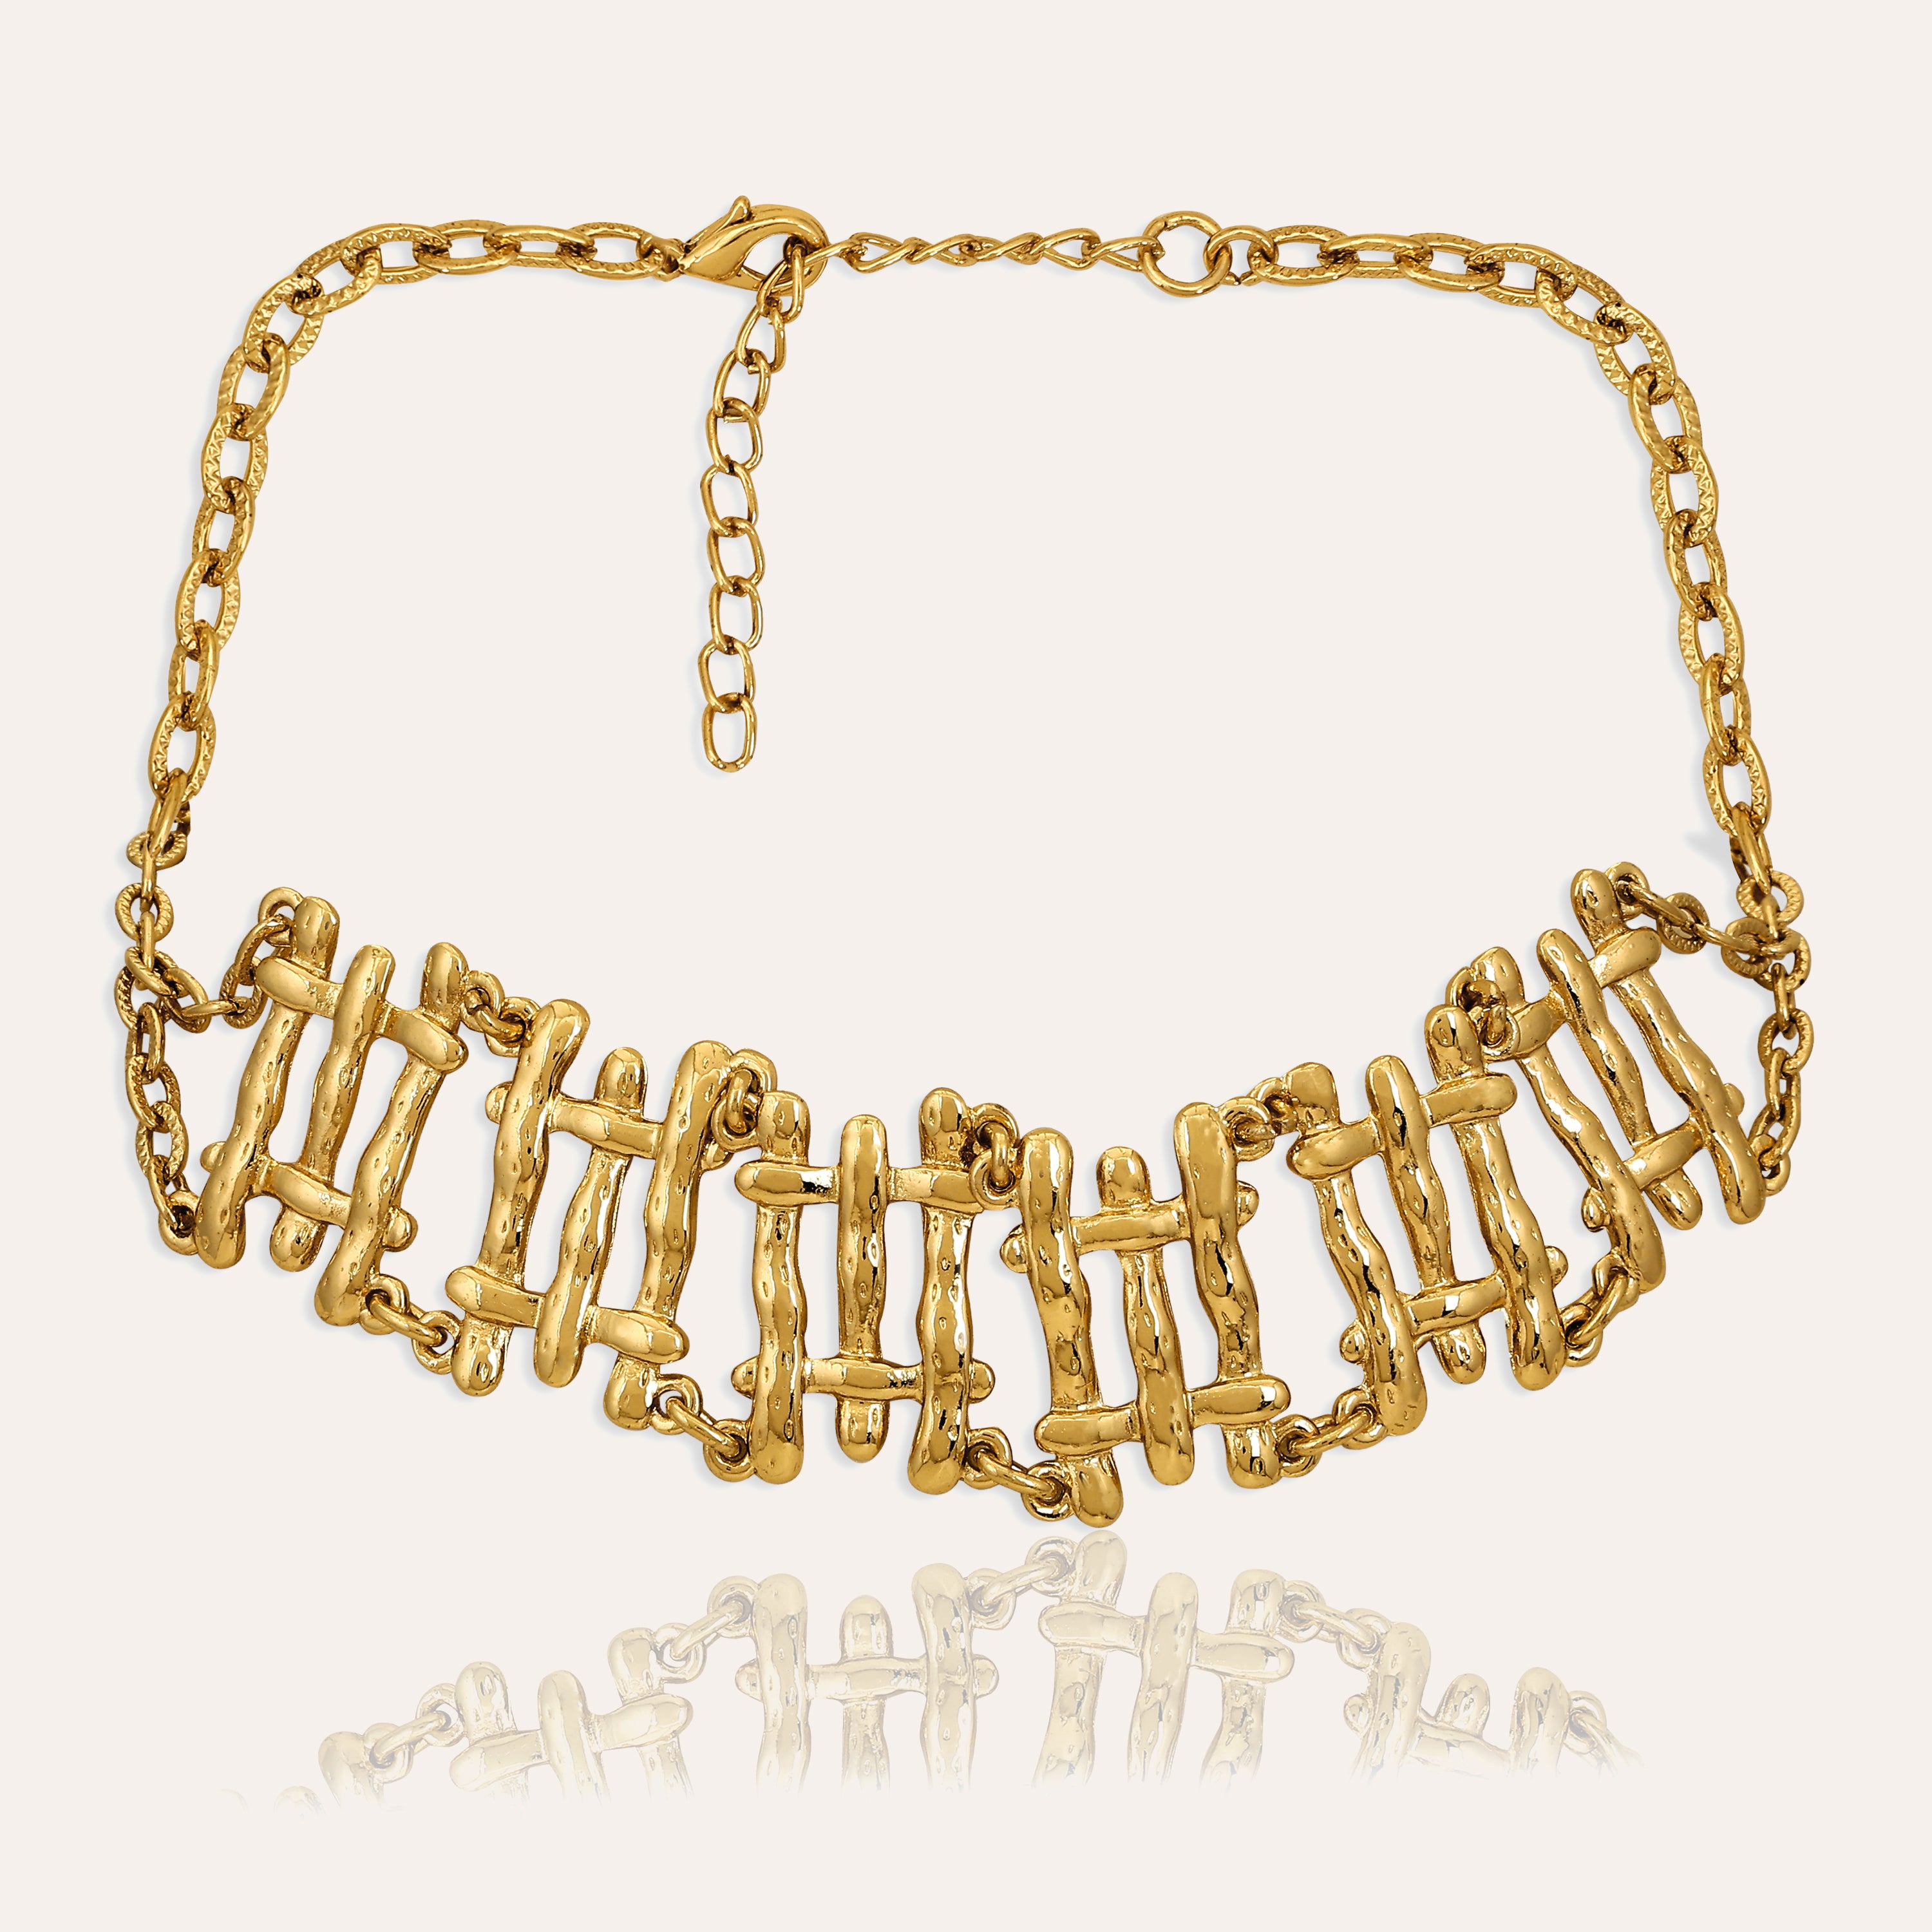 TFC Squeezy Squish Gold Plated Choker Necklace-Enhance your elegance with our collection of gold-plated necklaces for women. Choose from stunning pendant necklaces, chic choker necklaces, and trendy layered necklaces. Our sleek and dainty designs are both affordable and anti-tarnish, ensuring lasting beauty. Enjoy the cheapest fashion jewellery, lightweight and stylish- only at The Fun Company